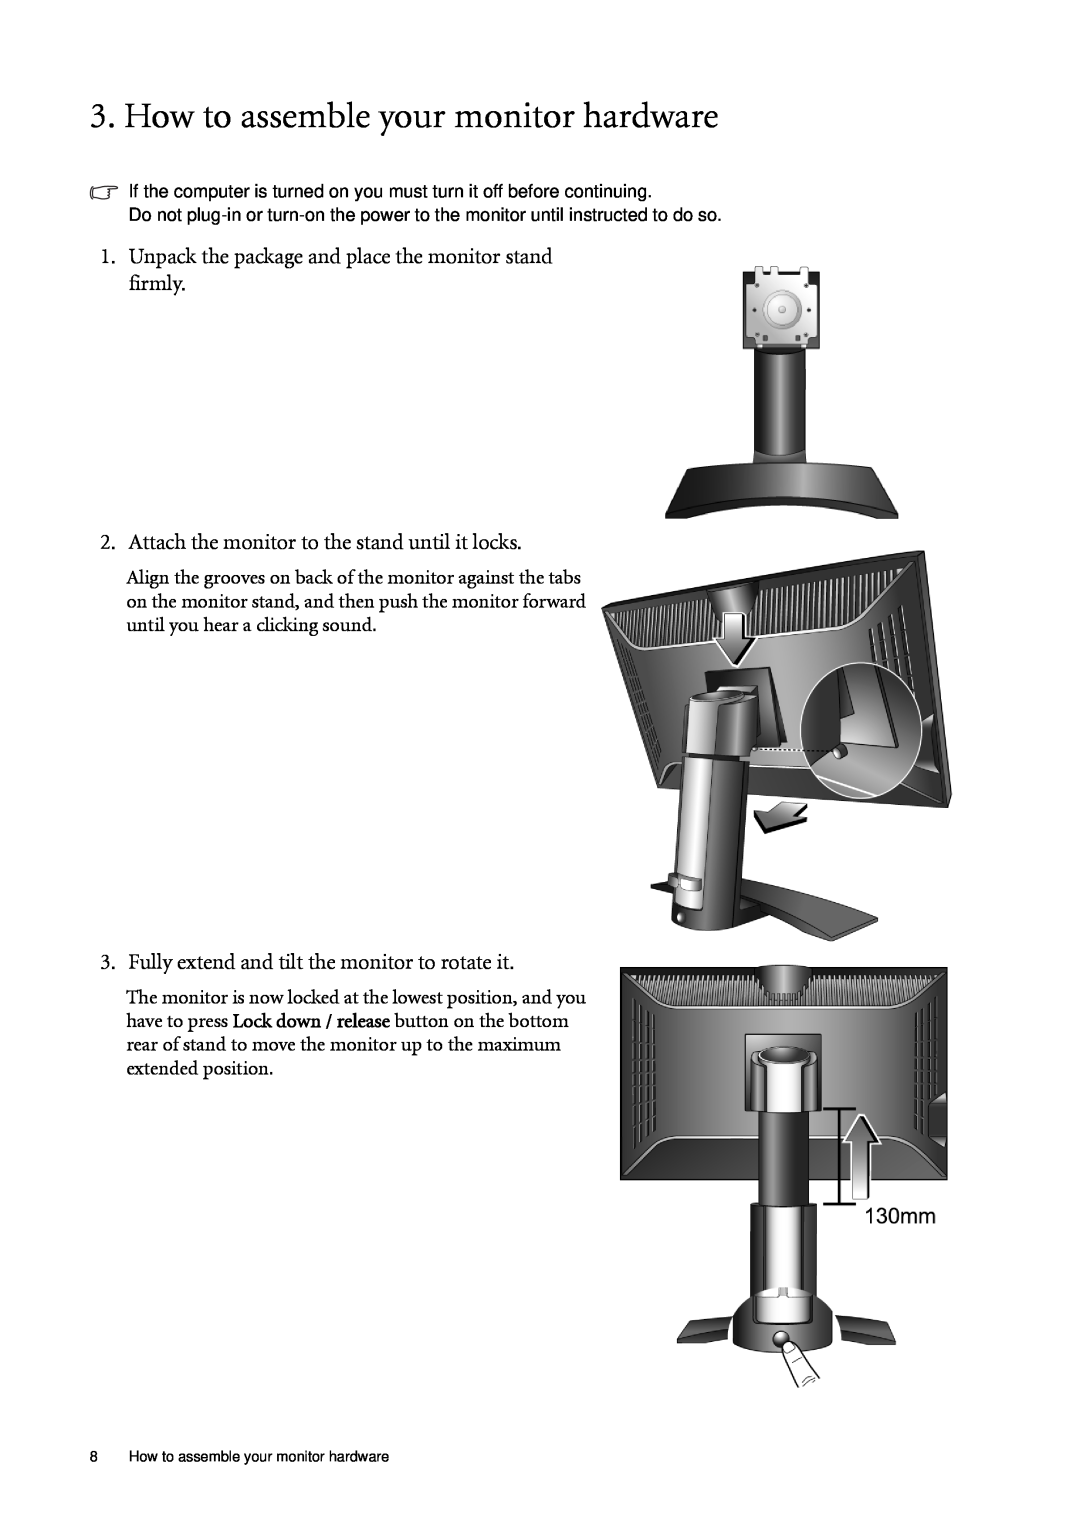 BenQ FP241WZ user manual How to assemble your monitor hardware, Unpack the package and place the monitor stand firmly 